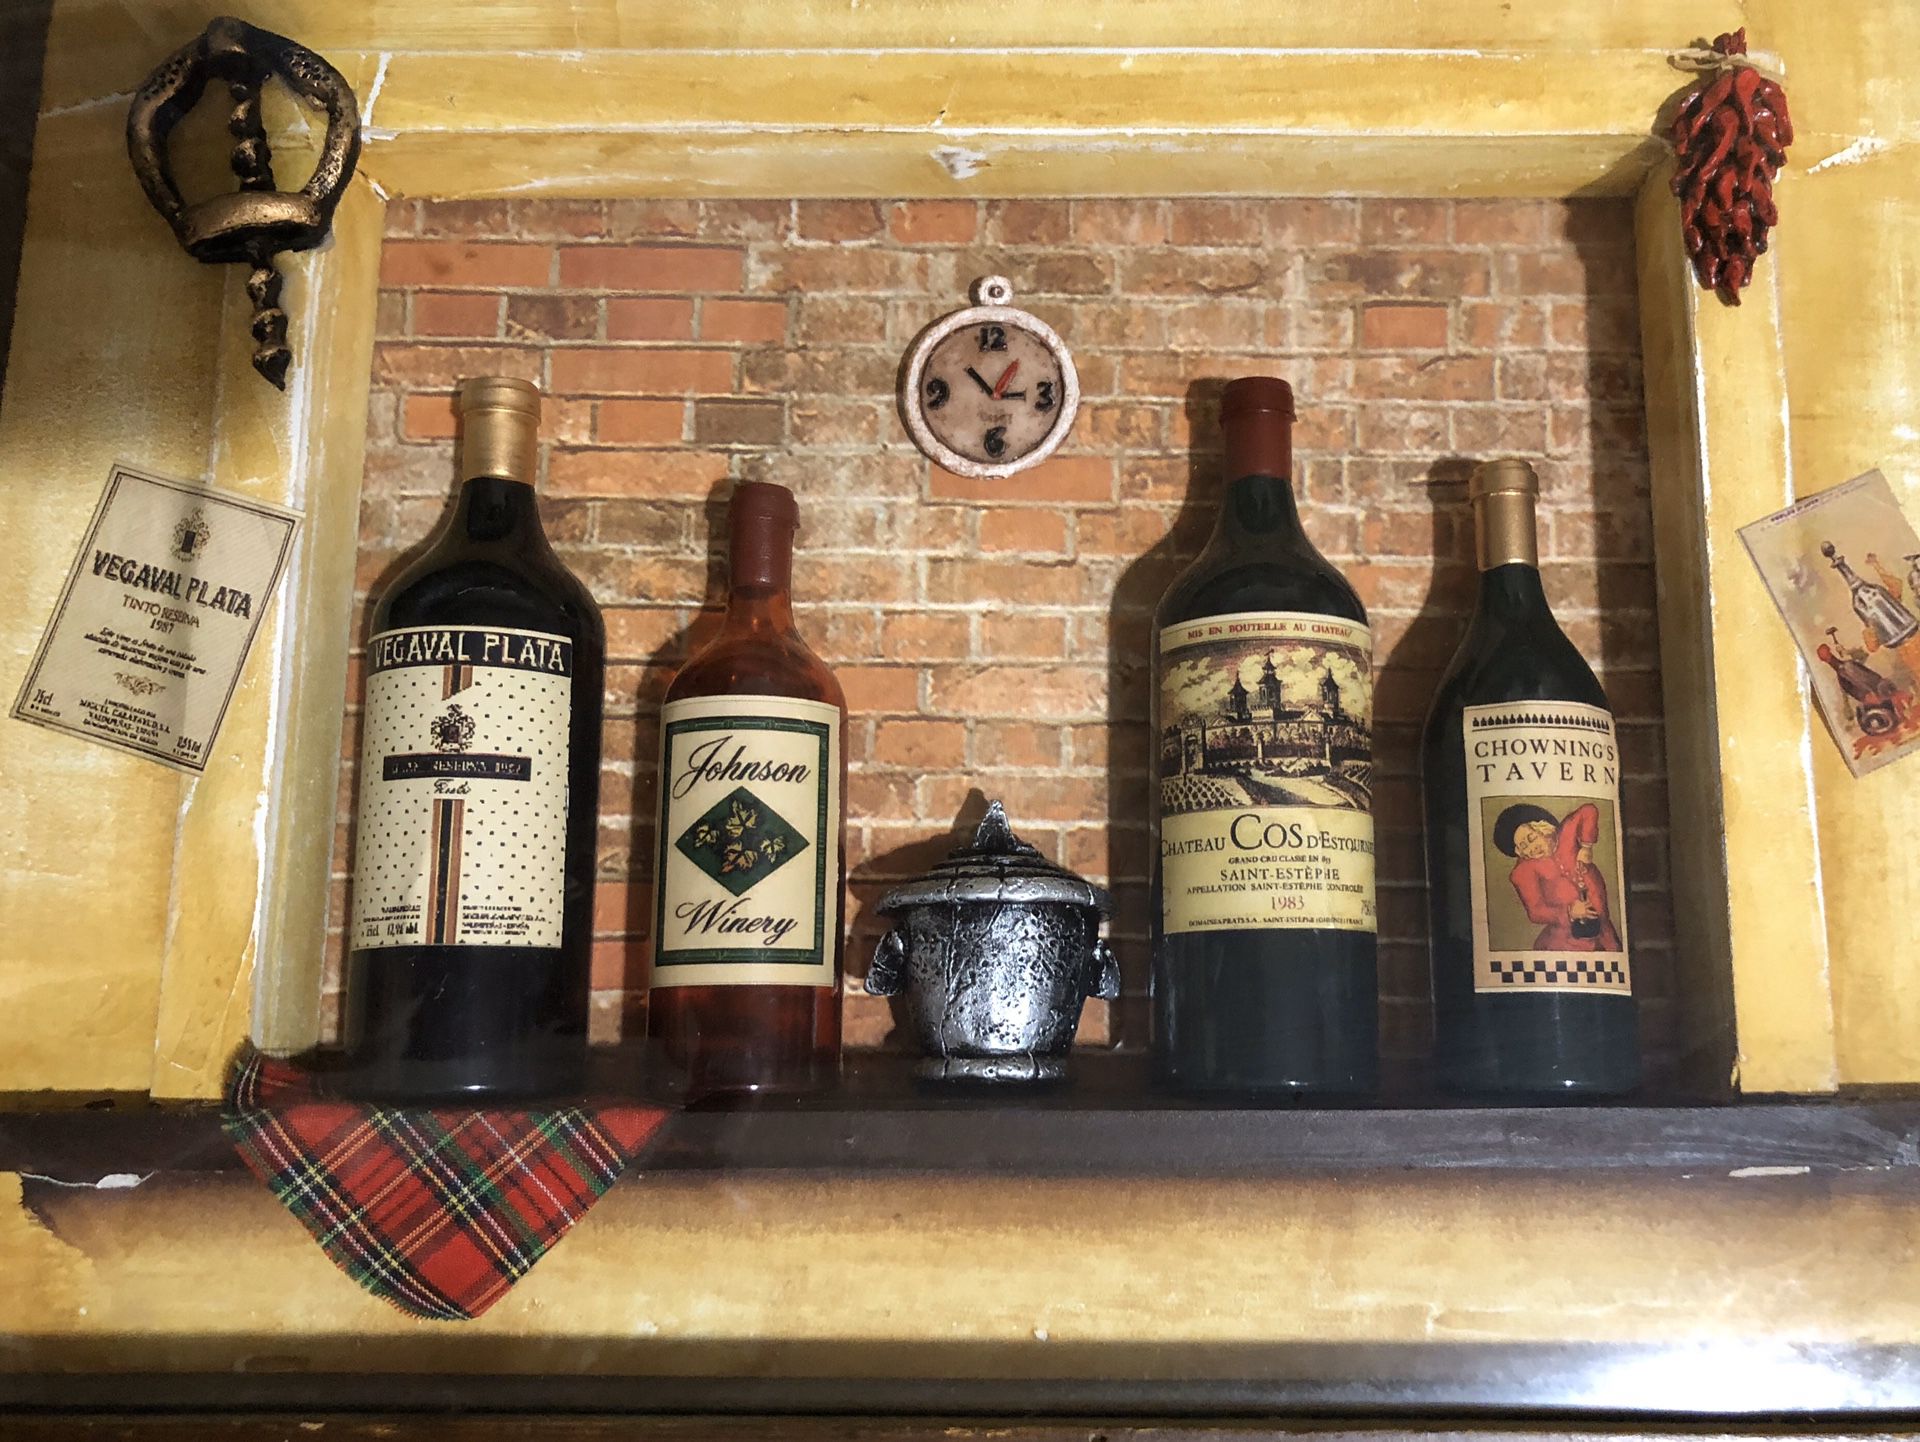 Wall Decor - Vintage Look Bar Counter with Mini Wine Bottles - 15”x11”